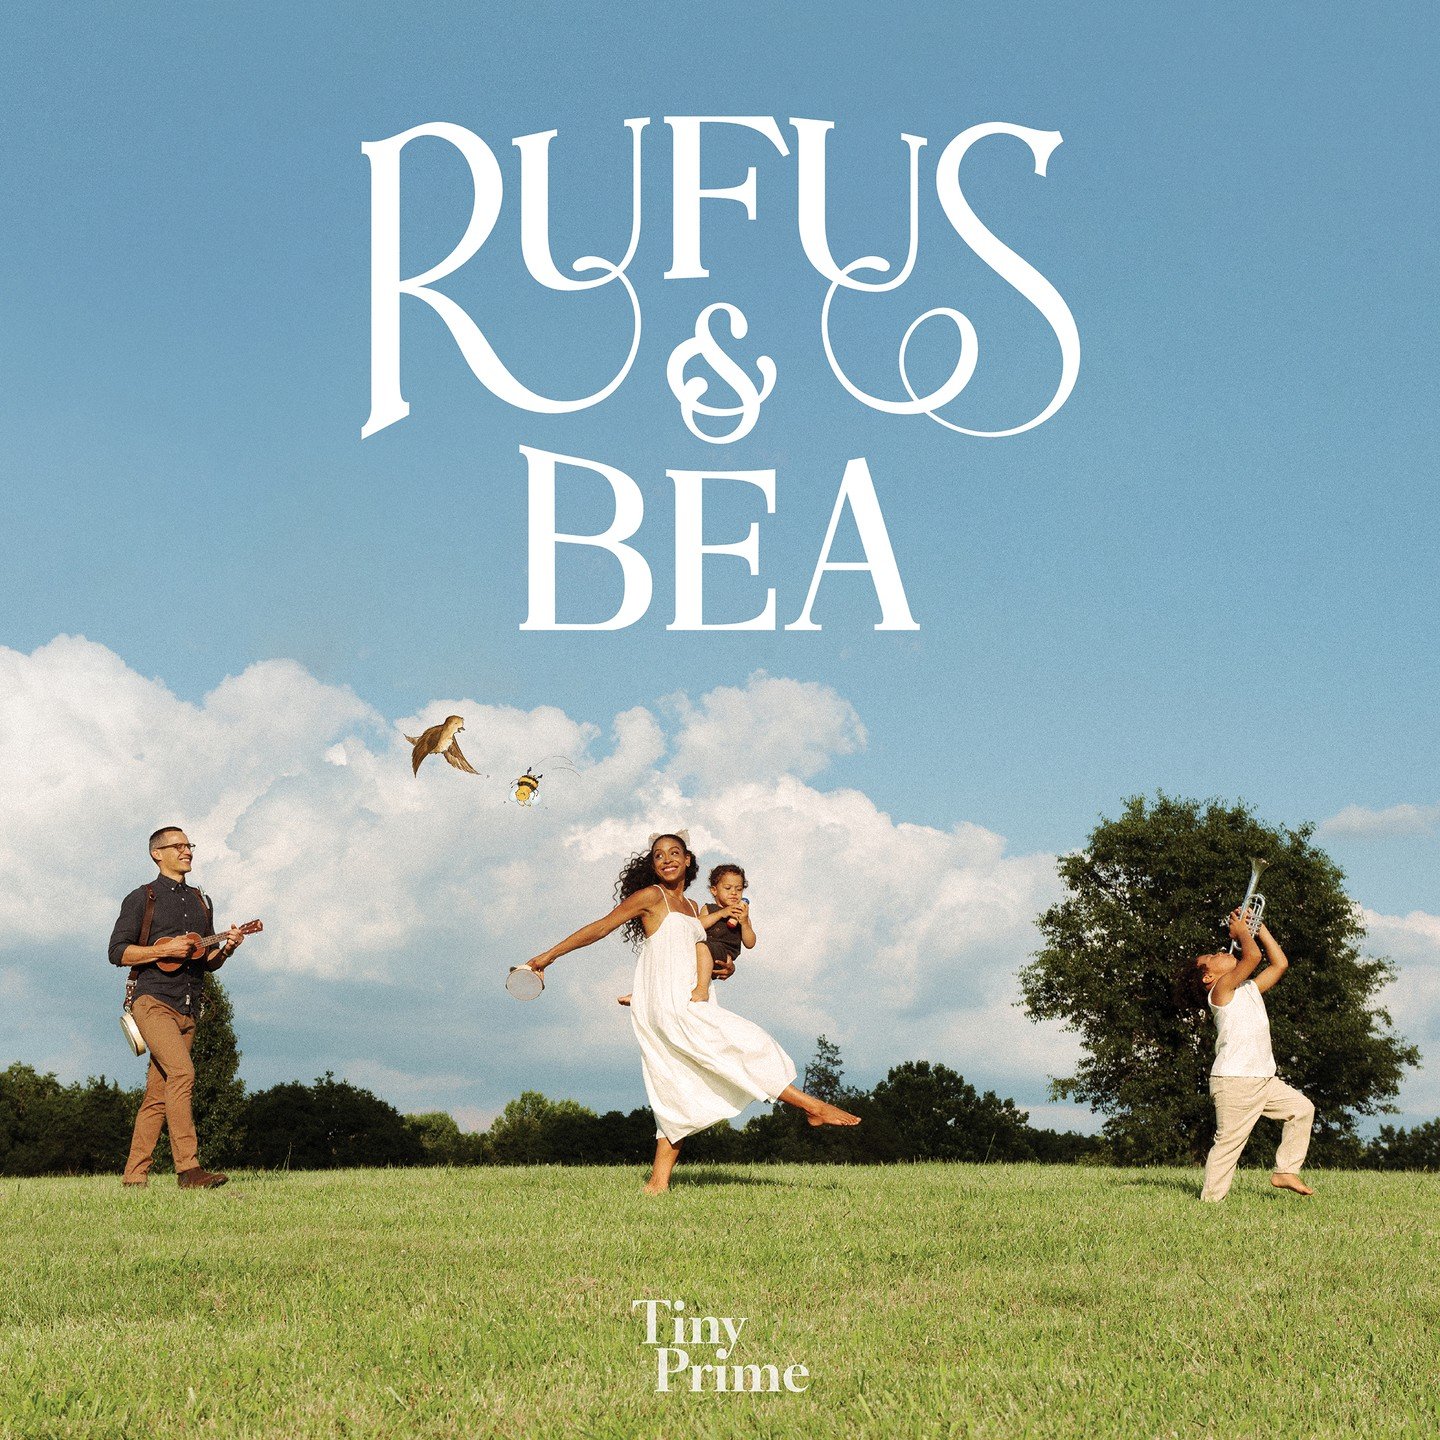 If you're in the market for some joy, I offer this auditory adventure - &quot;Rufus &amp; Bea&quot; (@rufusandbeaofficial) It WAS a great adventure and gift working with Tiny Prime @tinyprime (aka Lisa Tucker @lisa_tucker and @ryancummins ) to make t